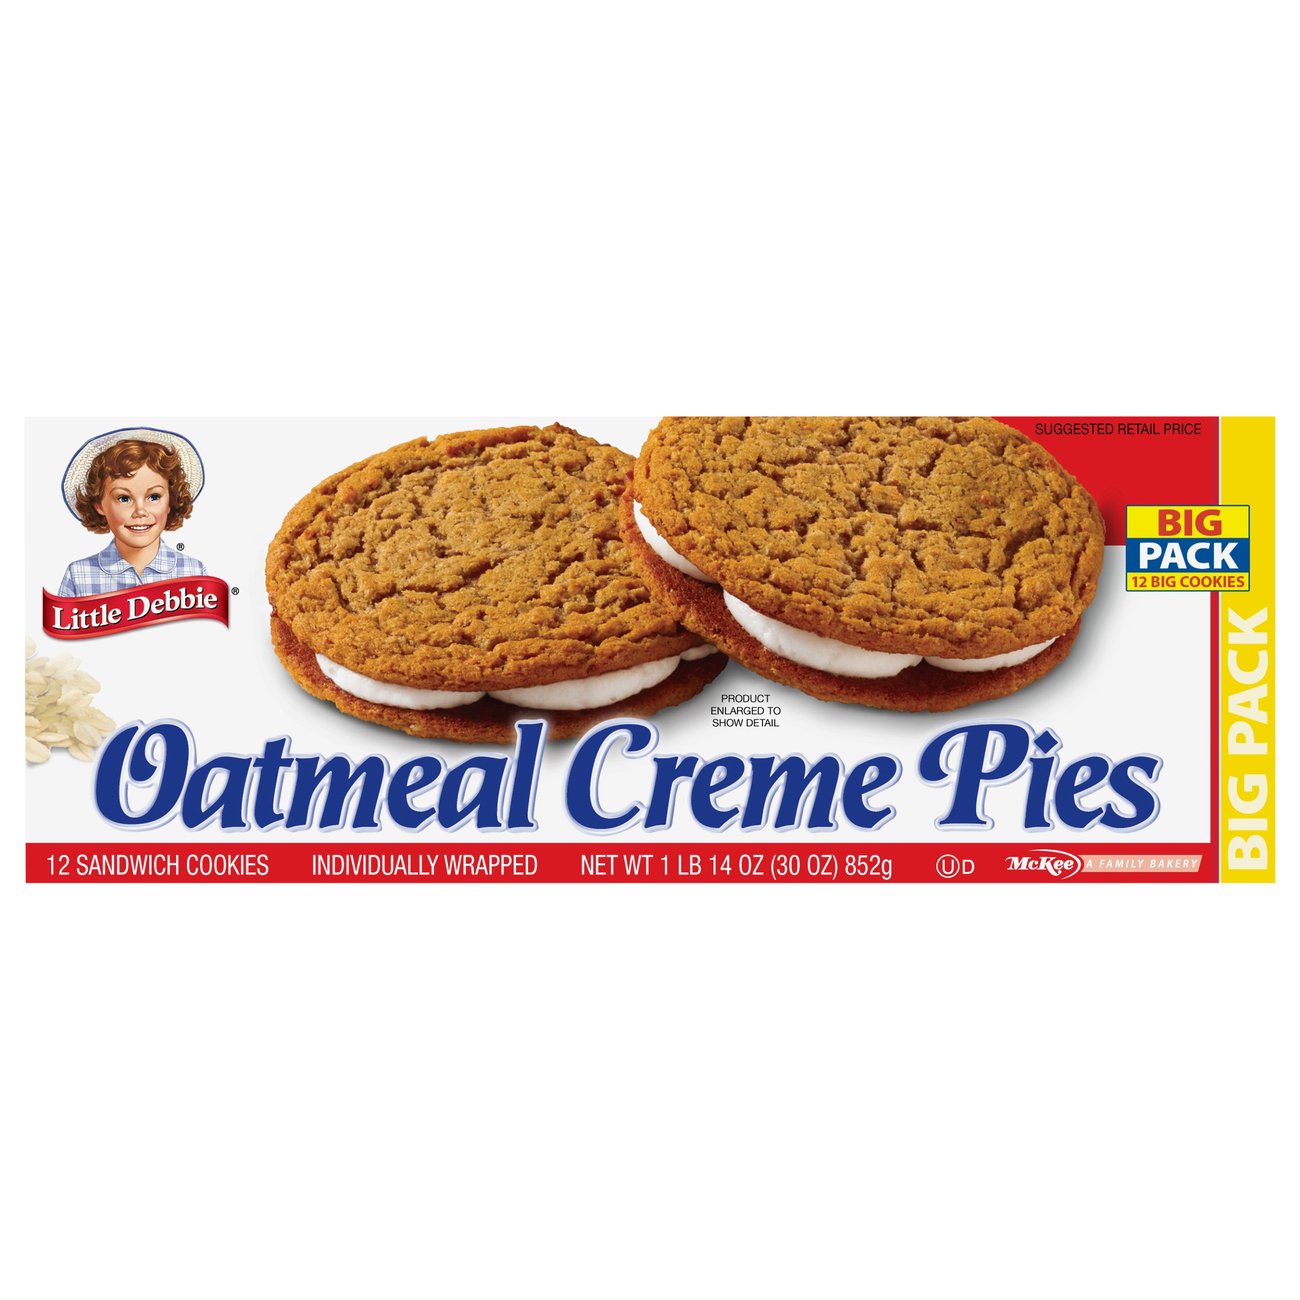 Little Debbie Oatmeal Creme Pies Big Pack - Shop Snack Cakes at H-E-B